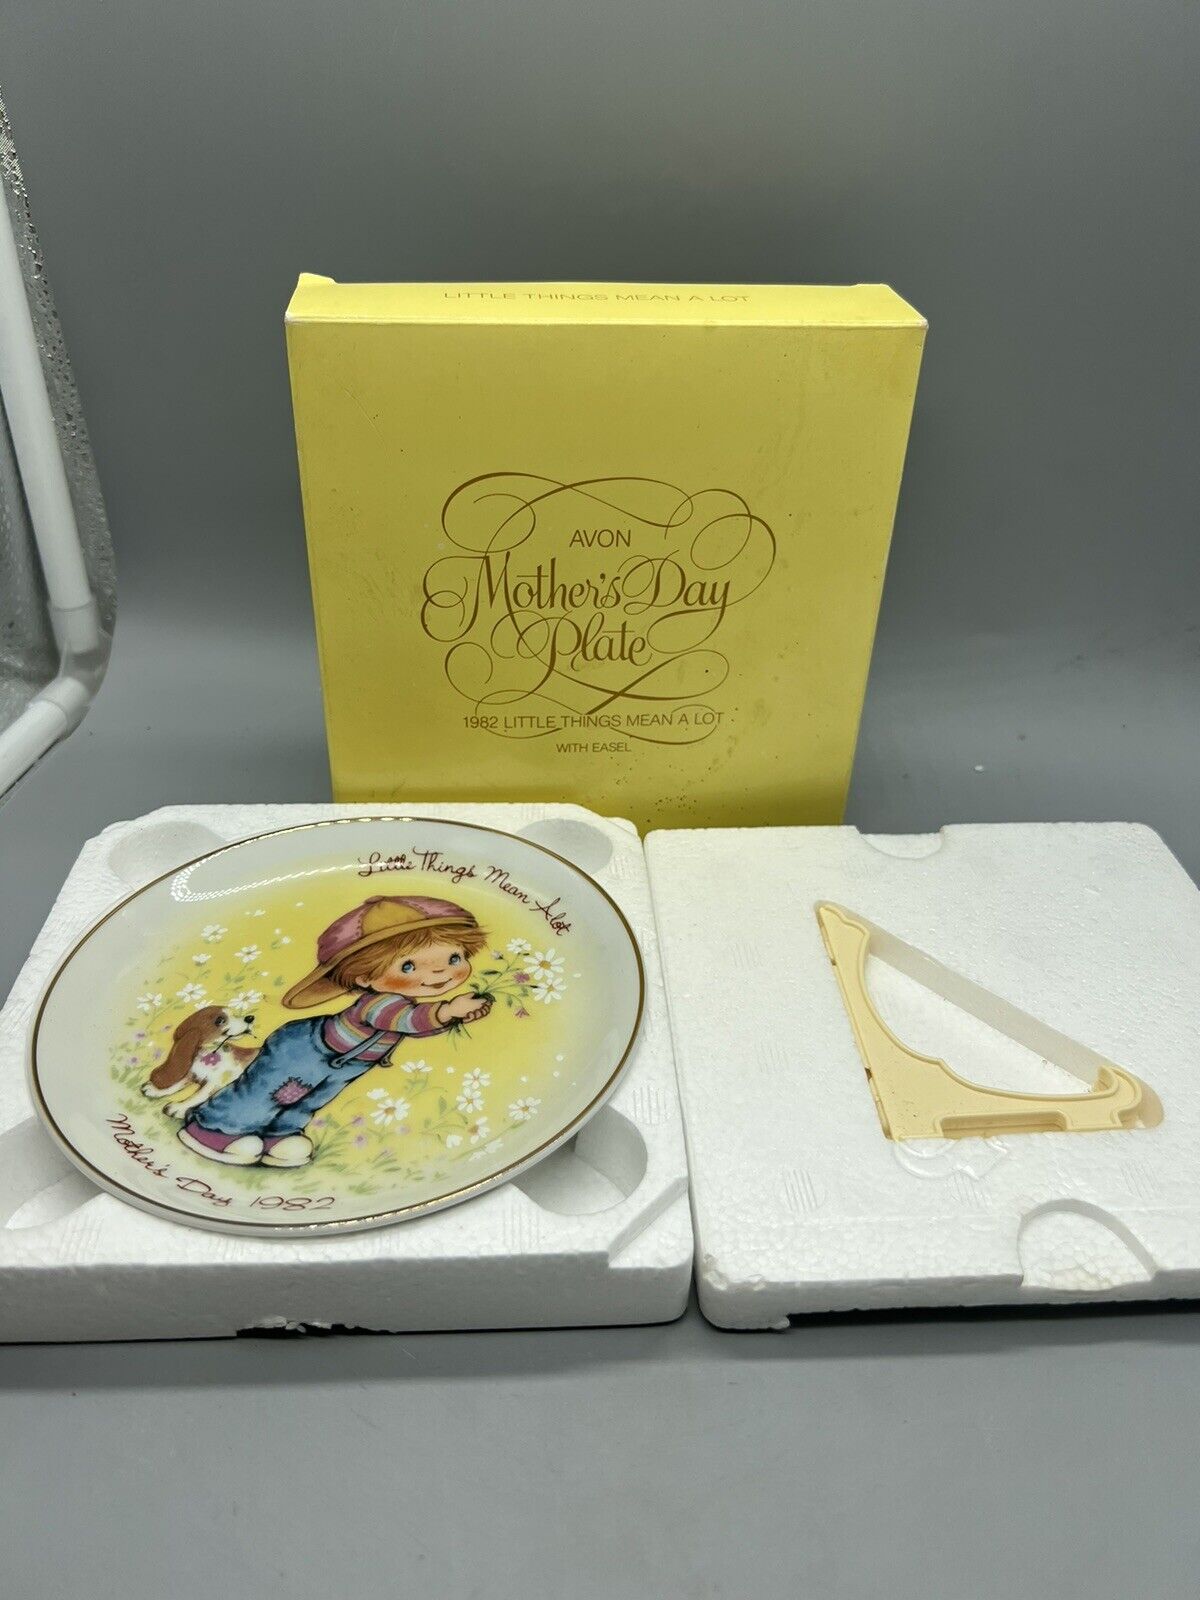 Avon 1982 Mothers Day Porcelain Plate 22k Gold Trim Little Things Mean A Lot NEW